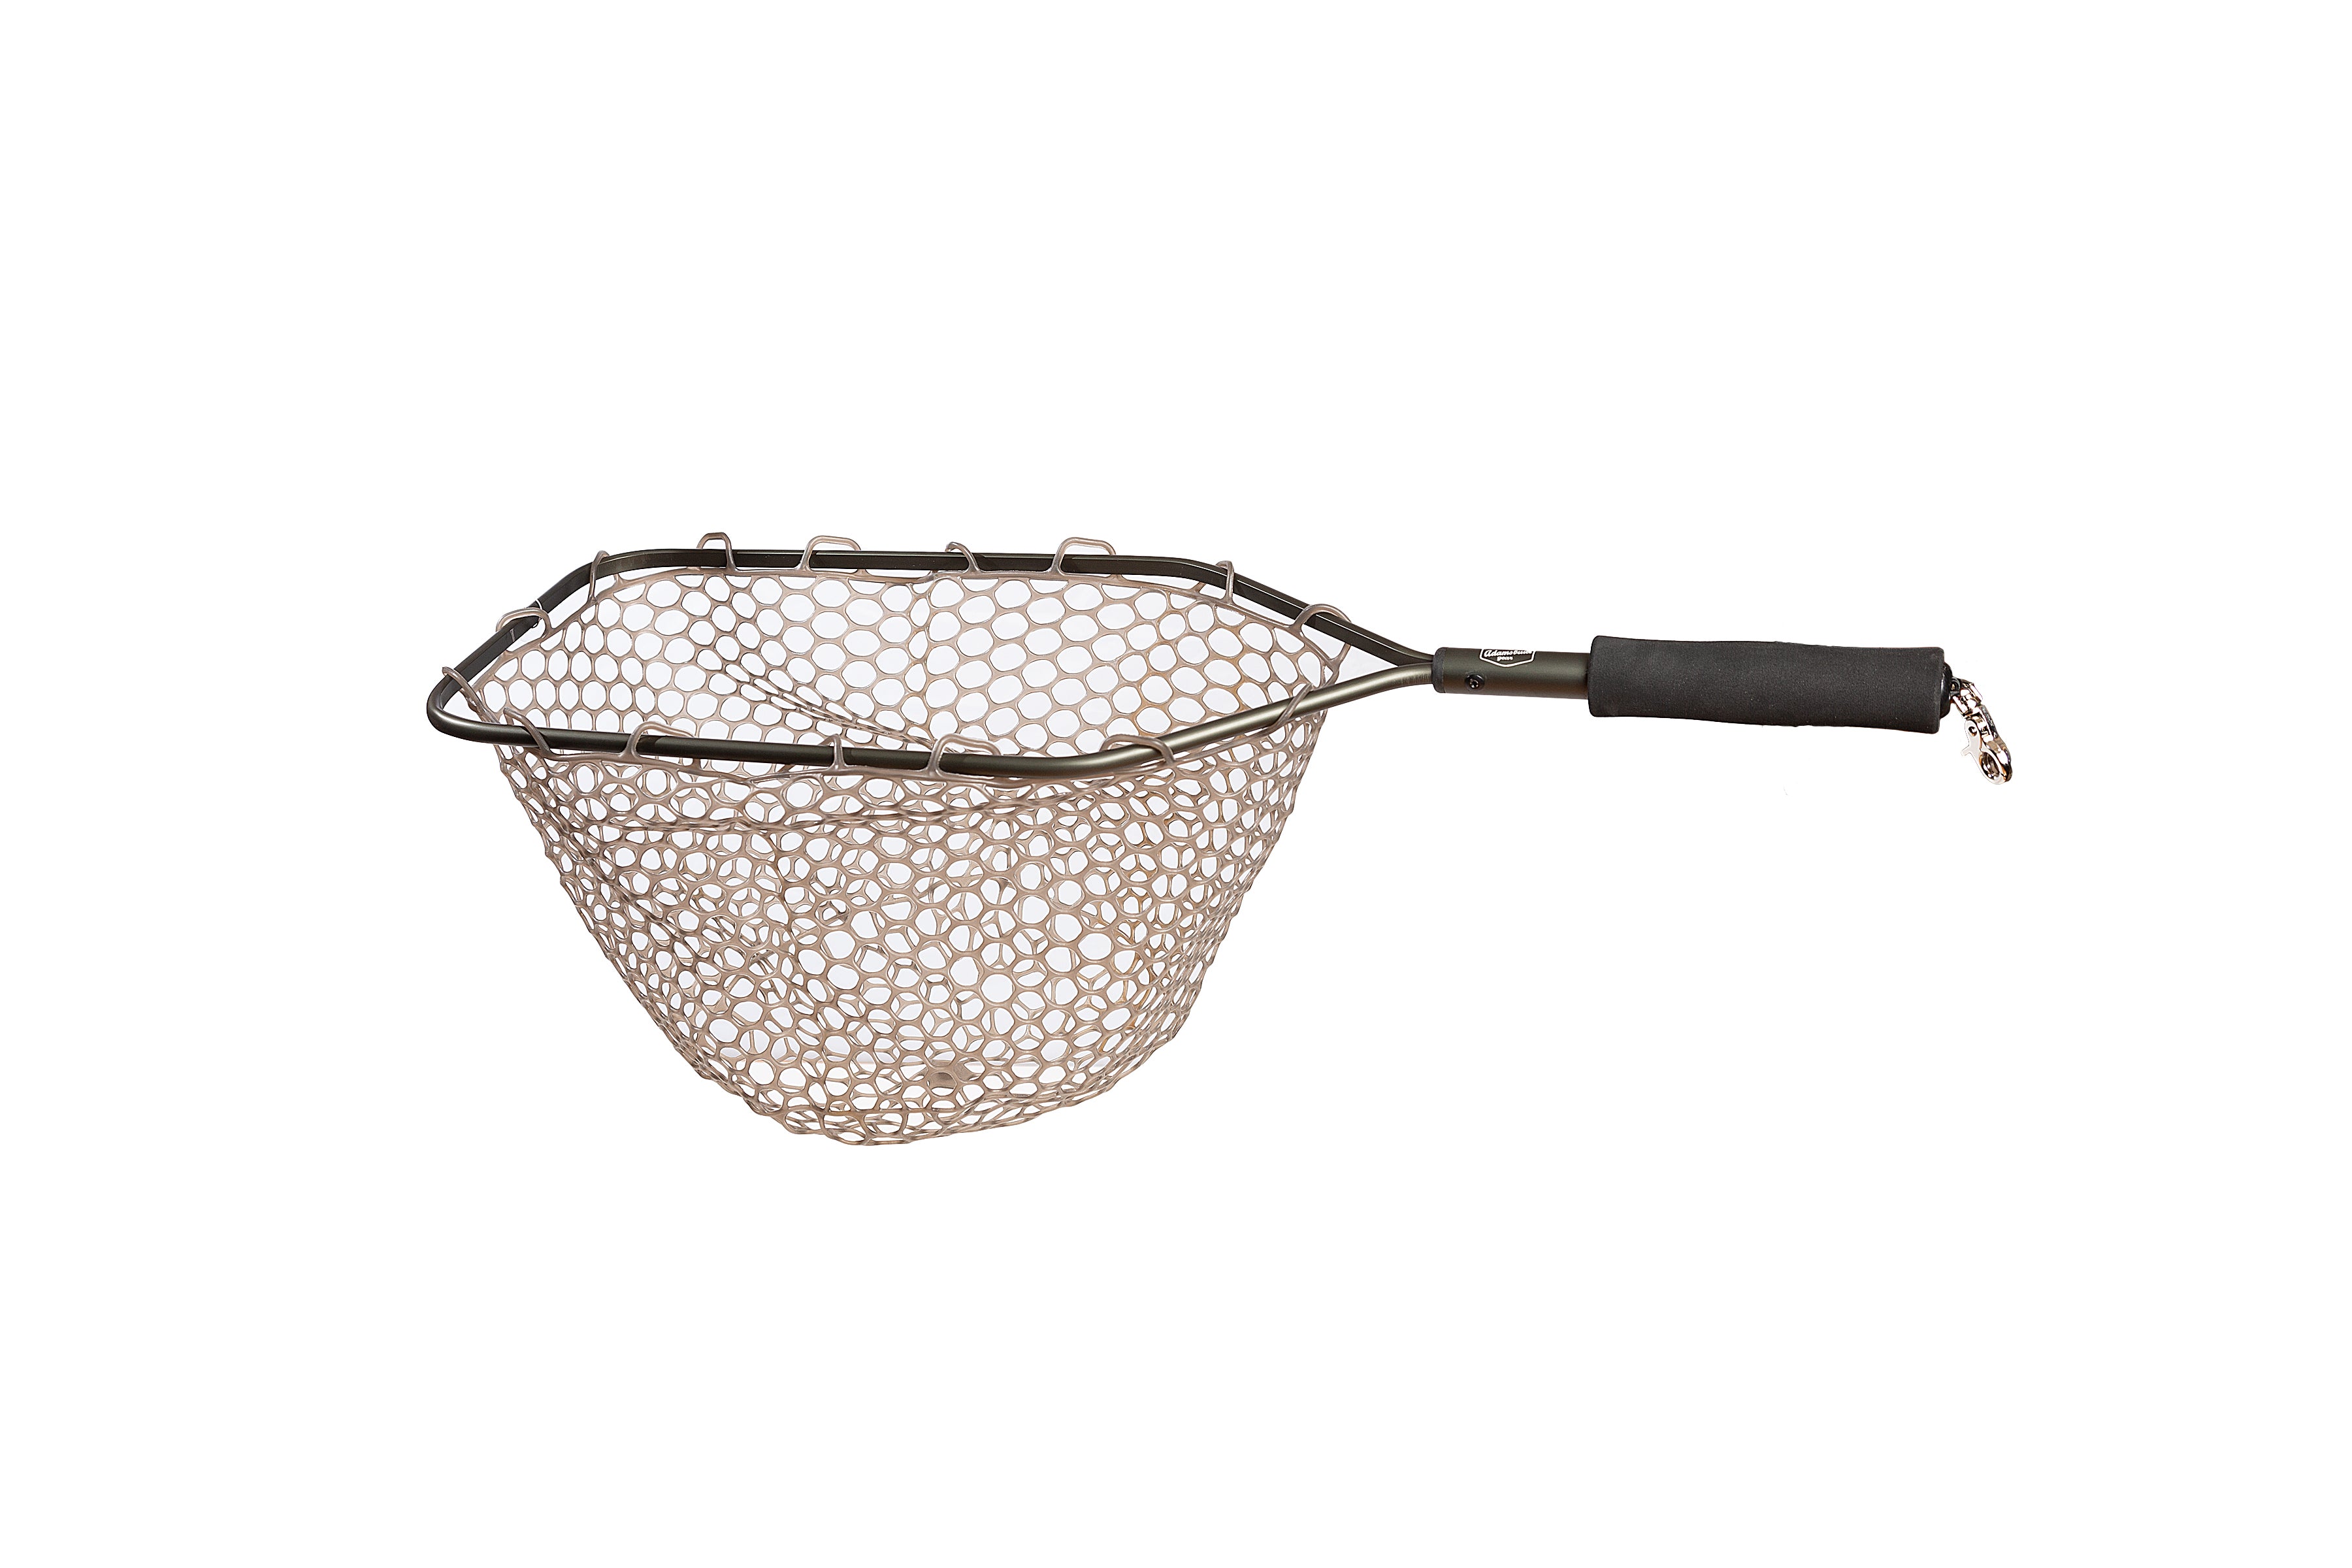 Adamsbuilt Aluminum Catch and Release Net, 15 with Camo Ghost Netting